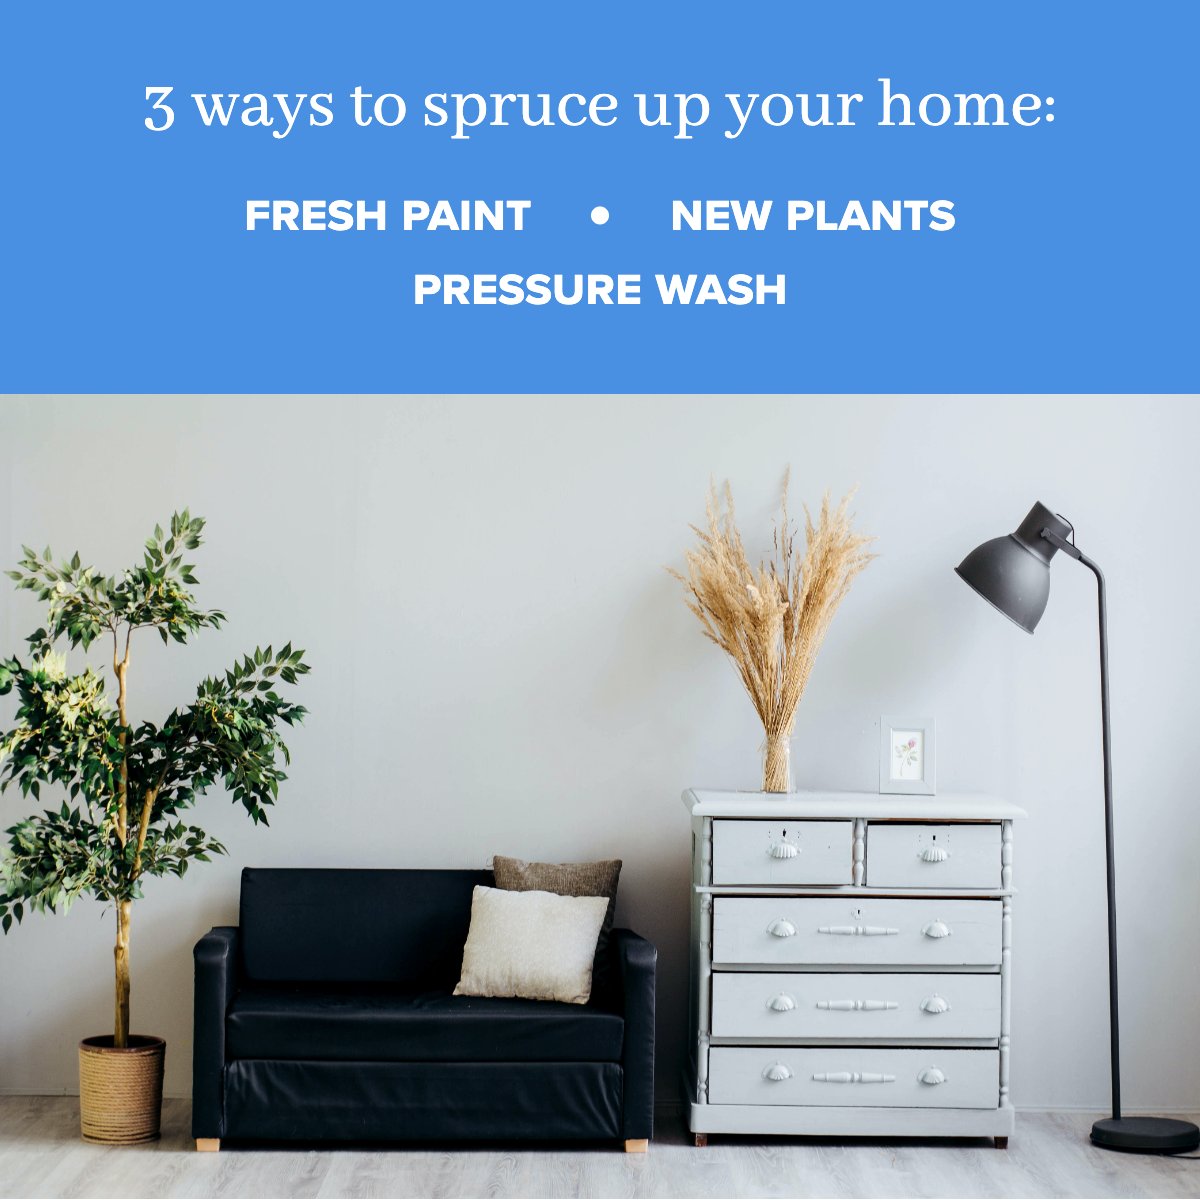 Try this tip to spruce up your home! 😎

Leave us your best design tip! 👇

#home #spruce #design #modern #realestate
 #firstresponderagents #thecooks #yoursocialagents #prescottrealtors #prescottaz